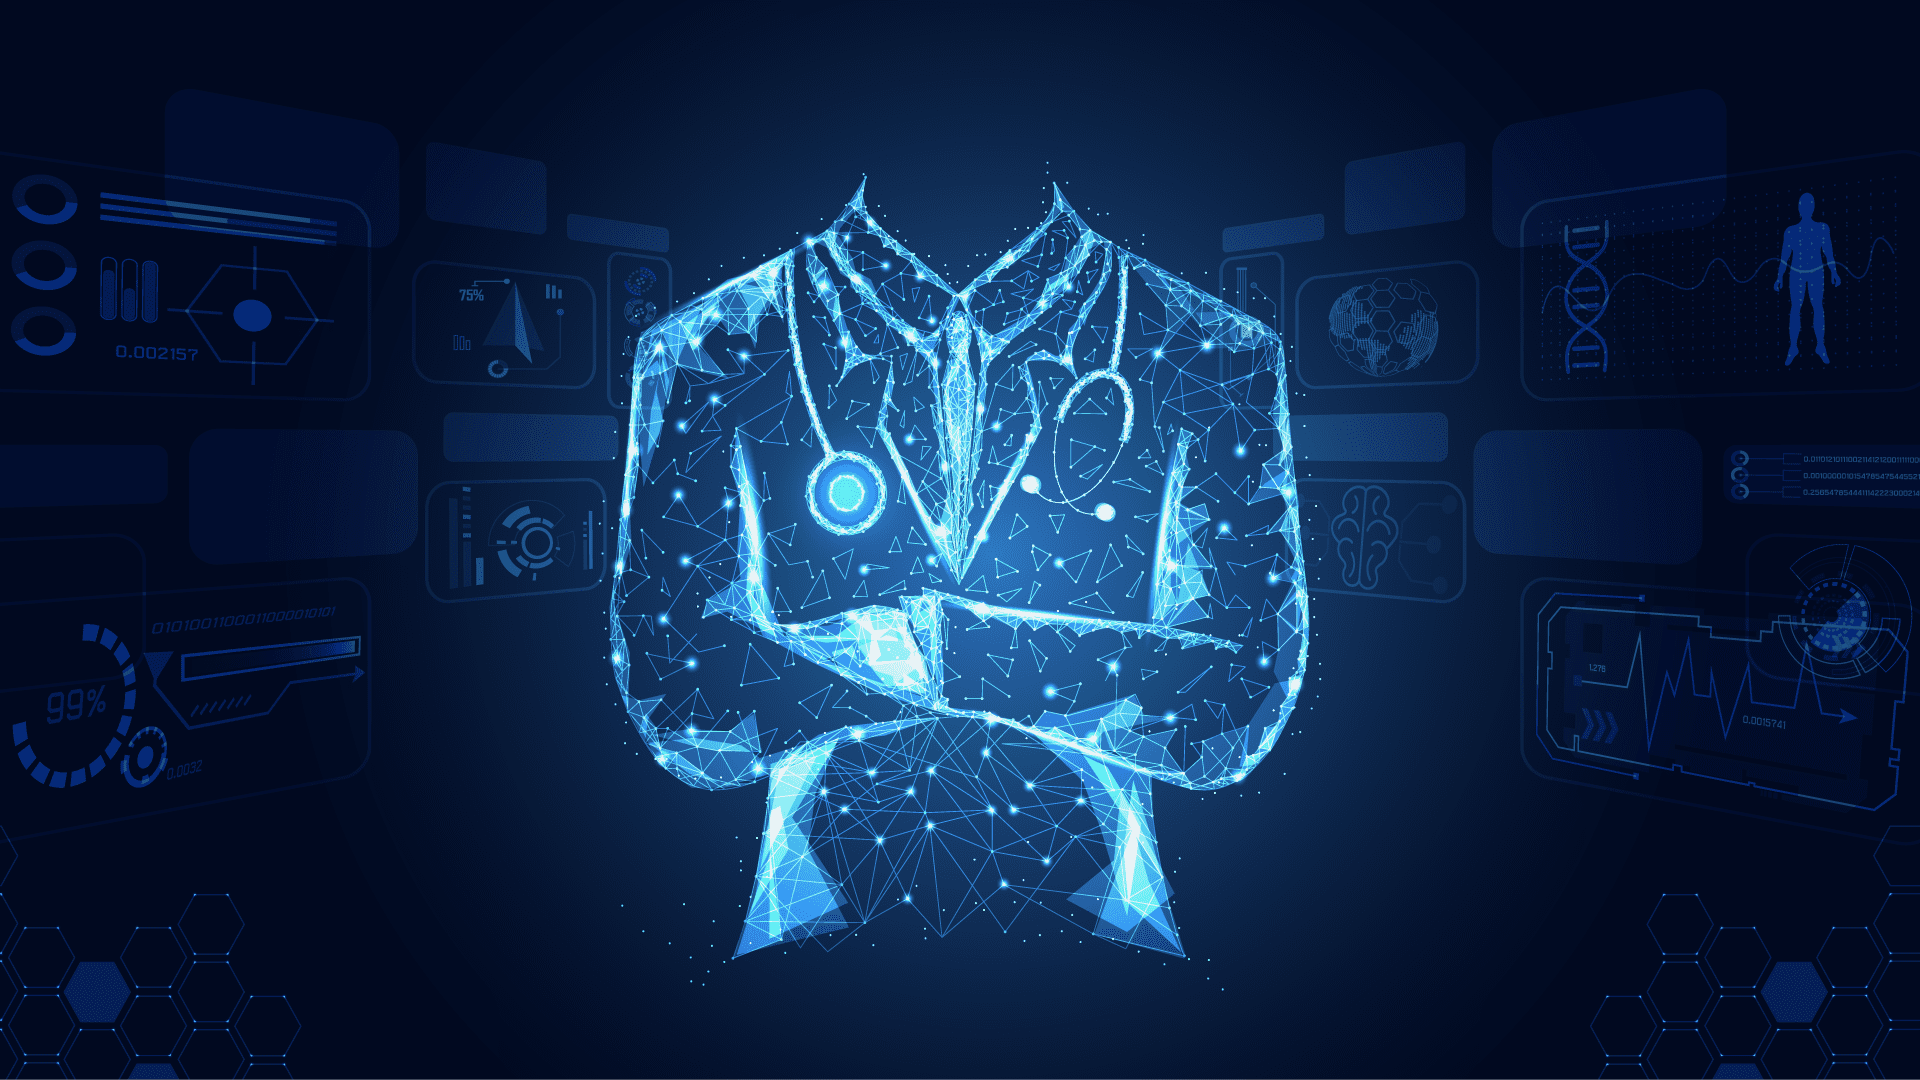 Embracing AI & Emerging Technologies to Advance Cancer Care